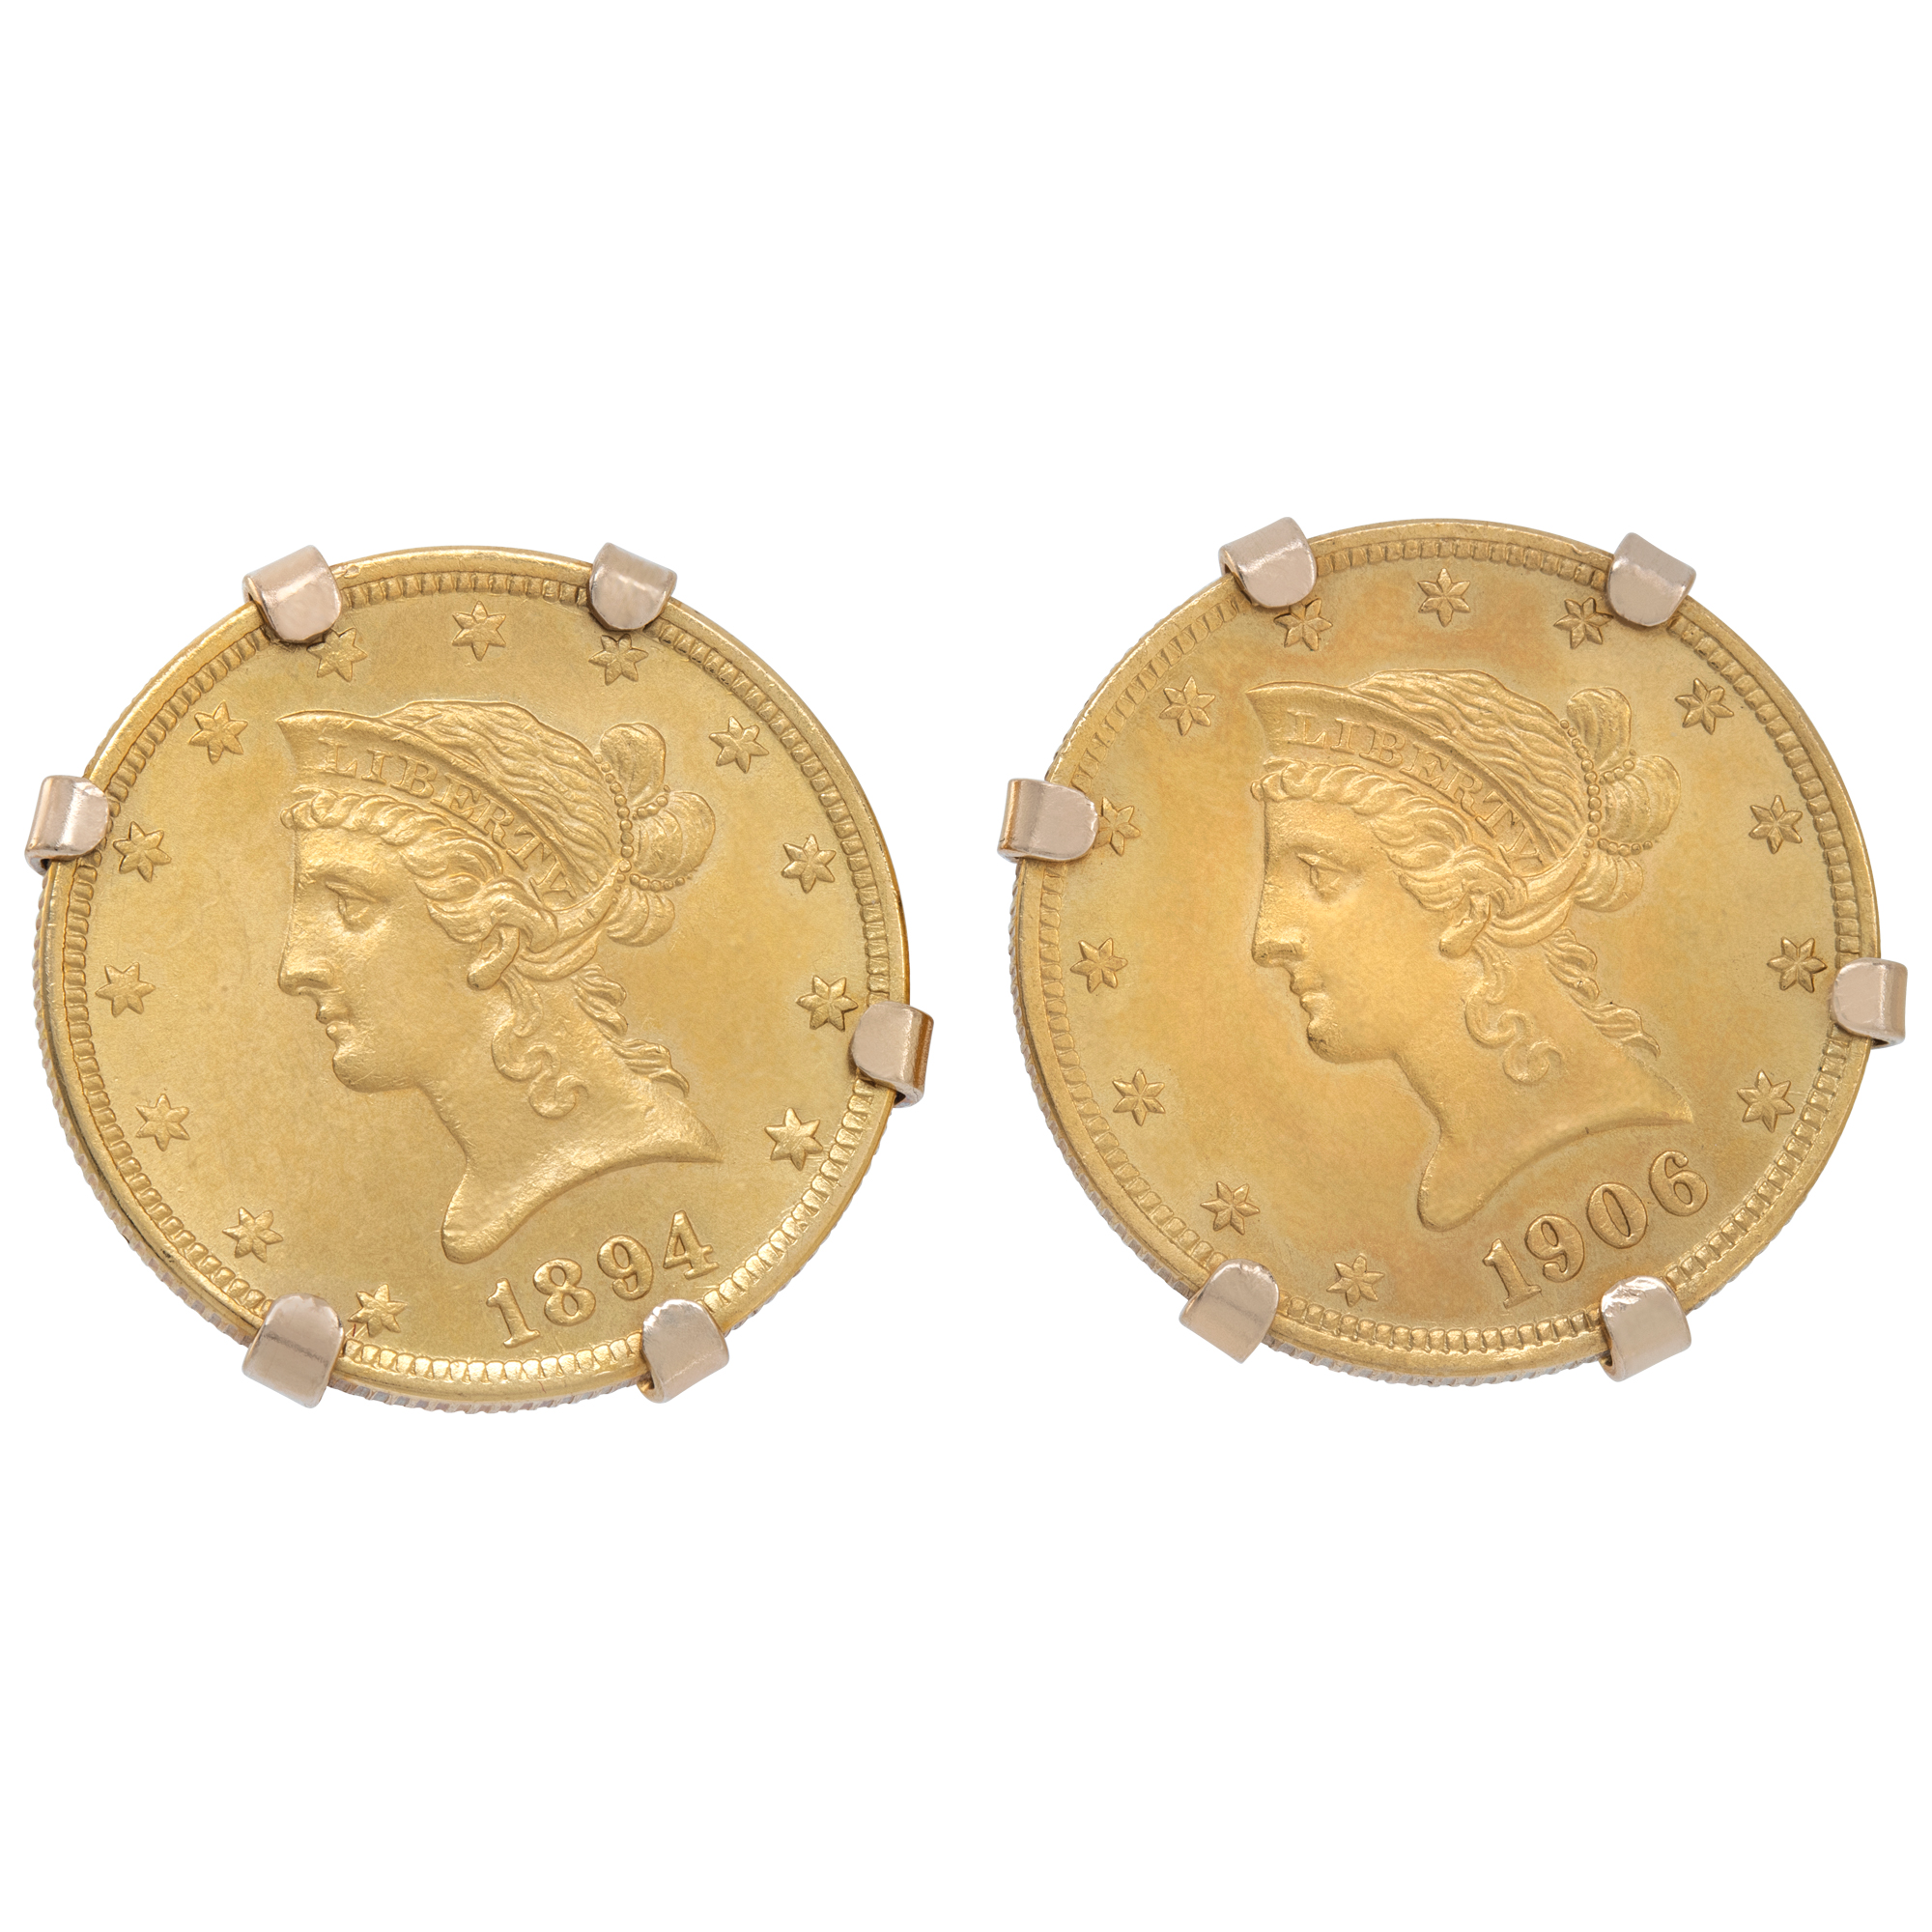 Pair of $10 US dollar gold coin (1894 & 1906) mounted as cufflink in 14K yellow gold prongs frame. Diameter: 25mm (1.00 inch). (Default)